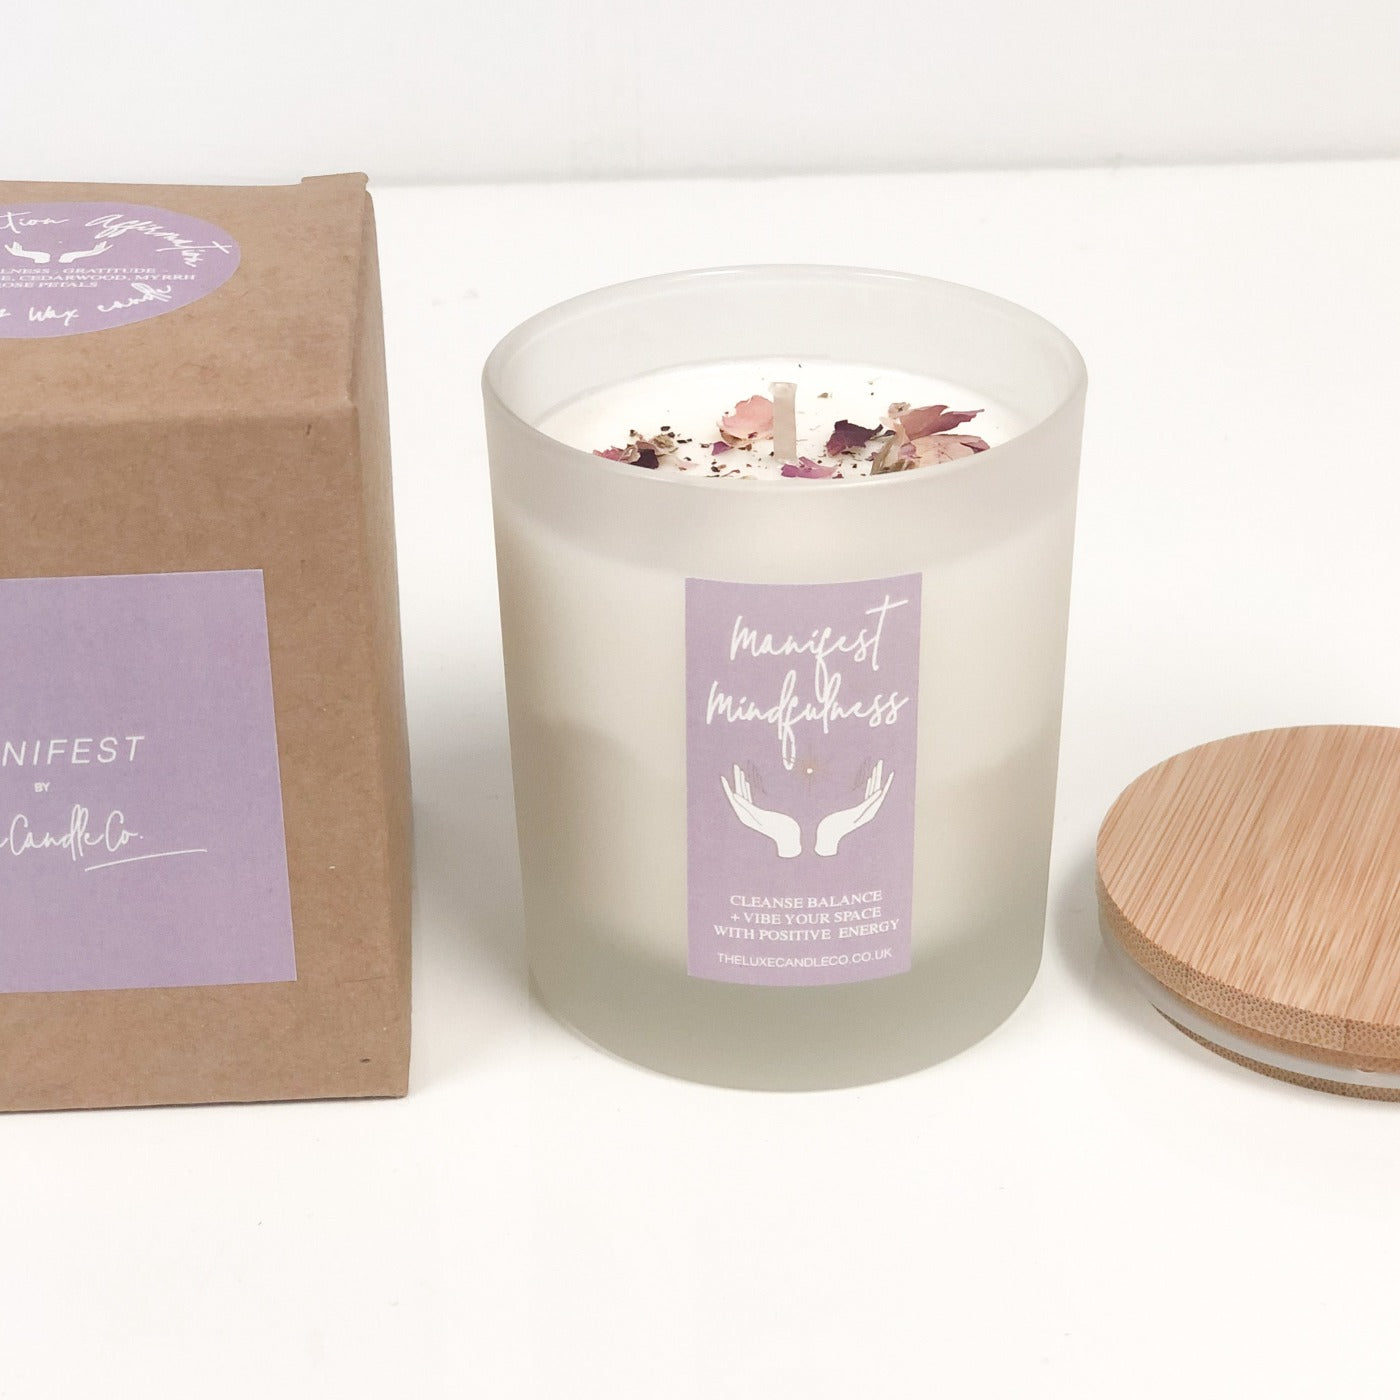 Manifest Mindfulness & Gratitude Candle | Wellness Candle to manifest mindfulness and gratitude | The Luxe Candle Co